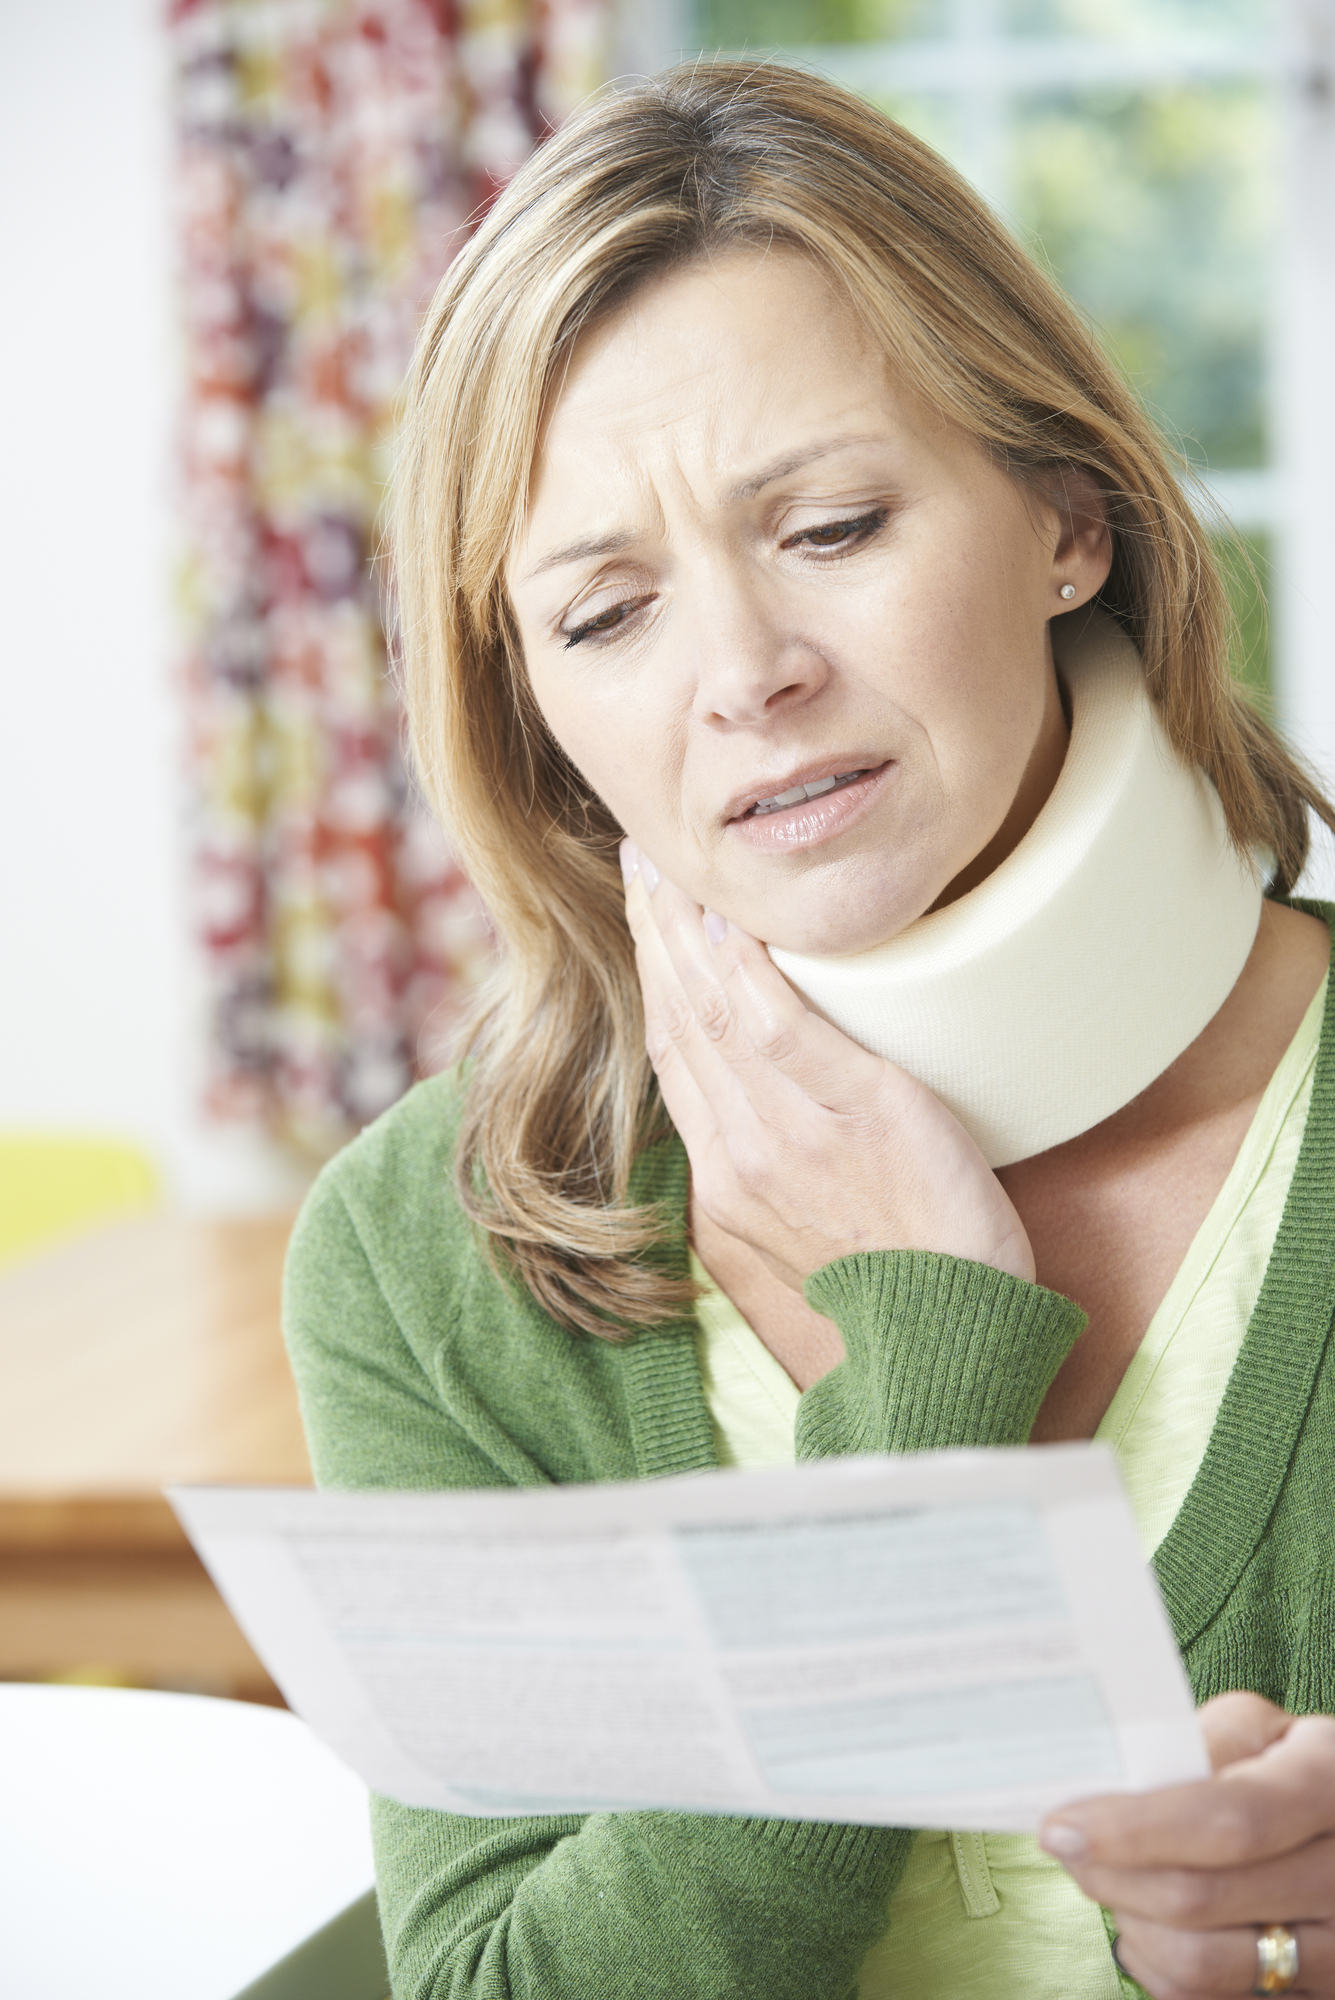 workers compensation lawyer-woman reading paper while wearing neck brace